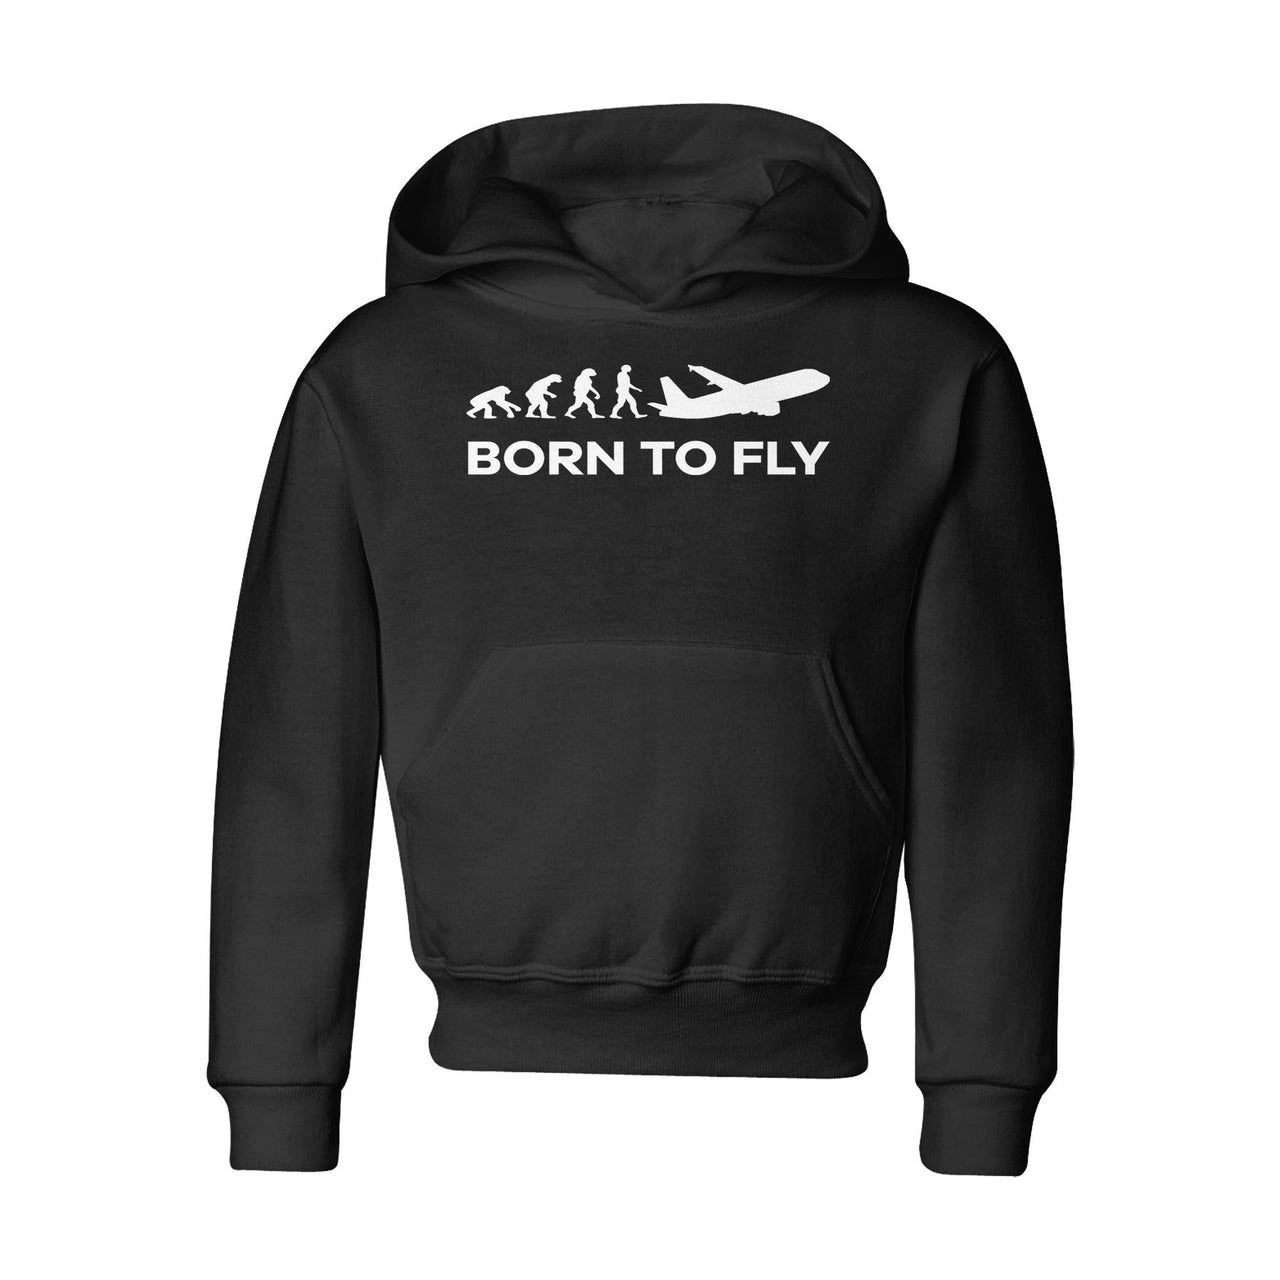 Born To Fly Designed "CHILDREN" Hoodies